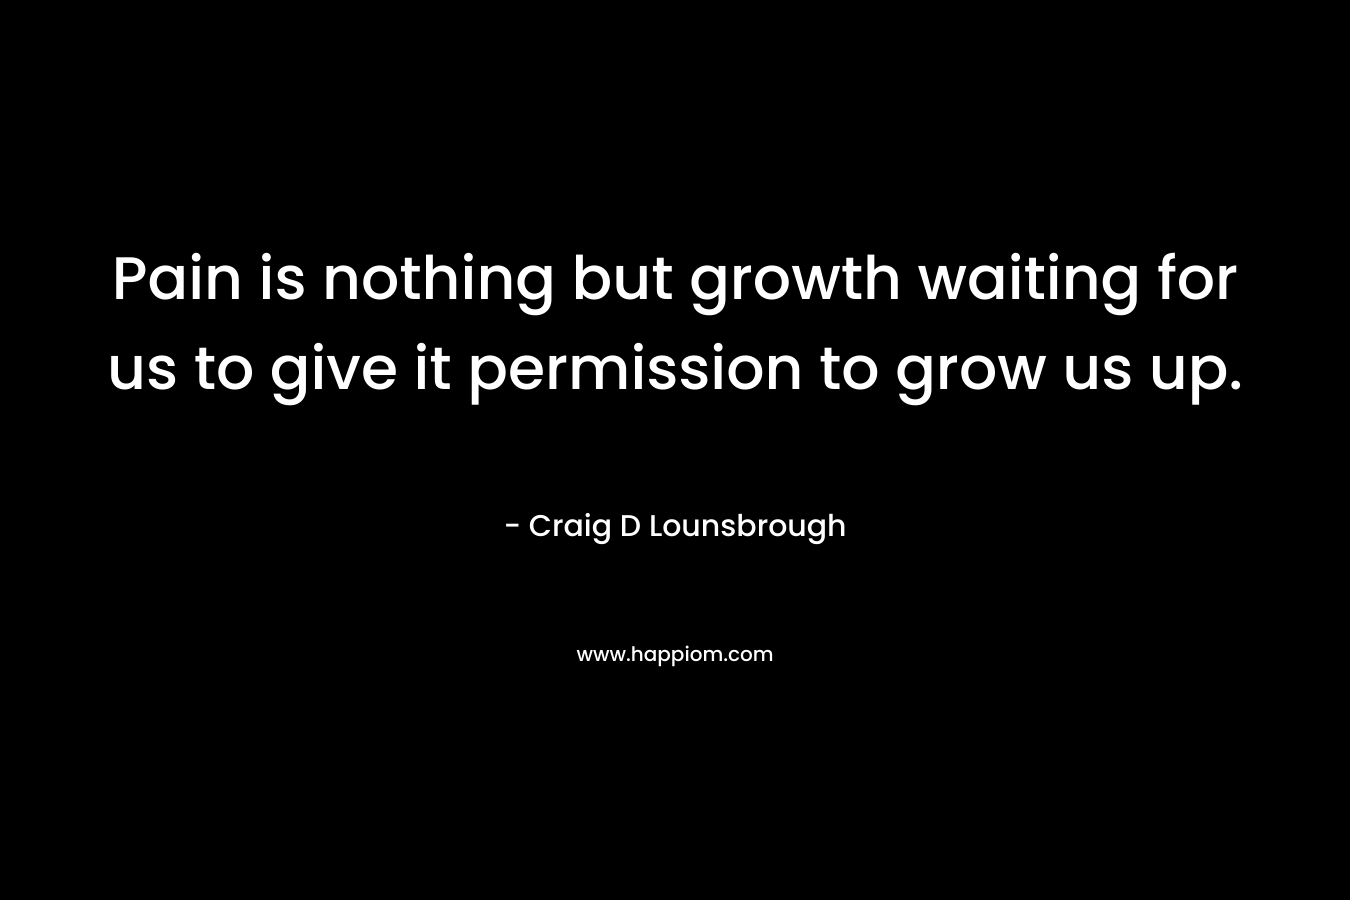 Pain is nothing but growth waiting for us to give it permission to grow us up.